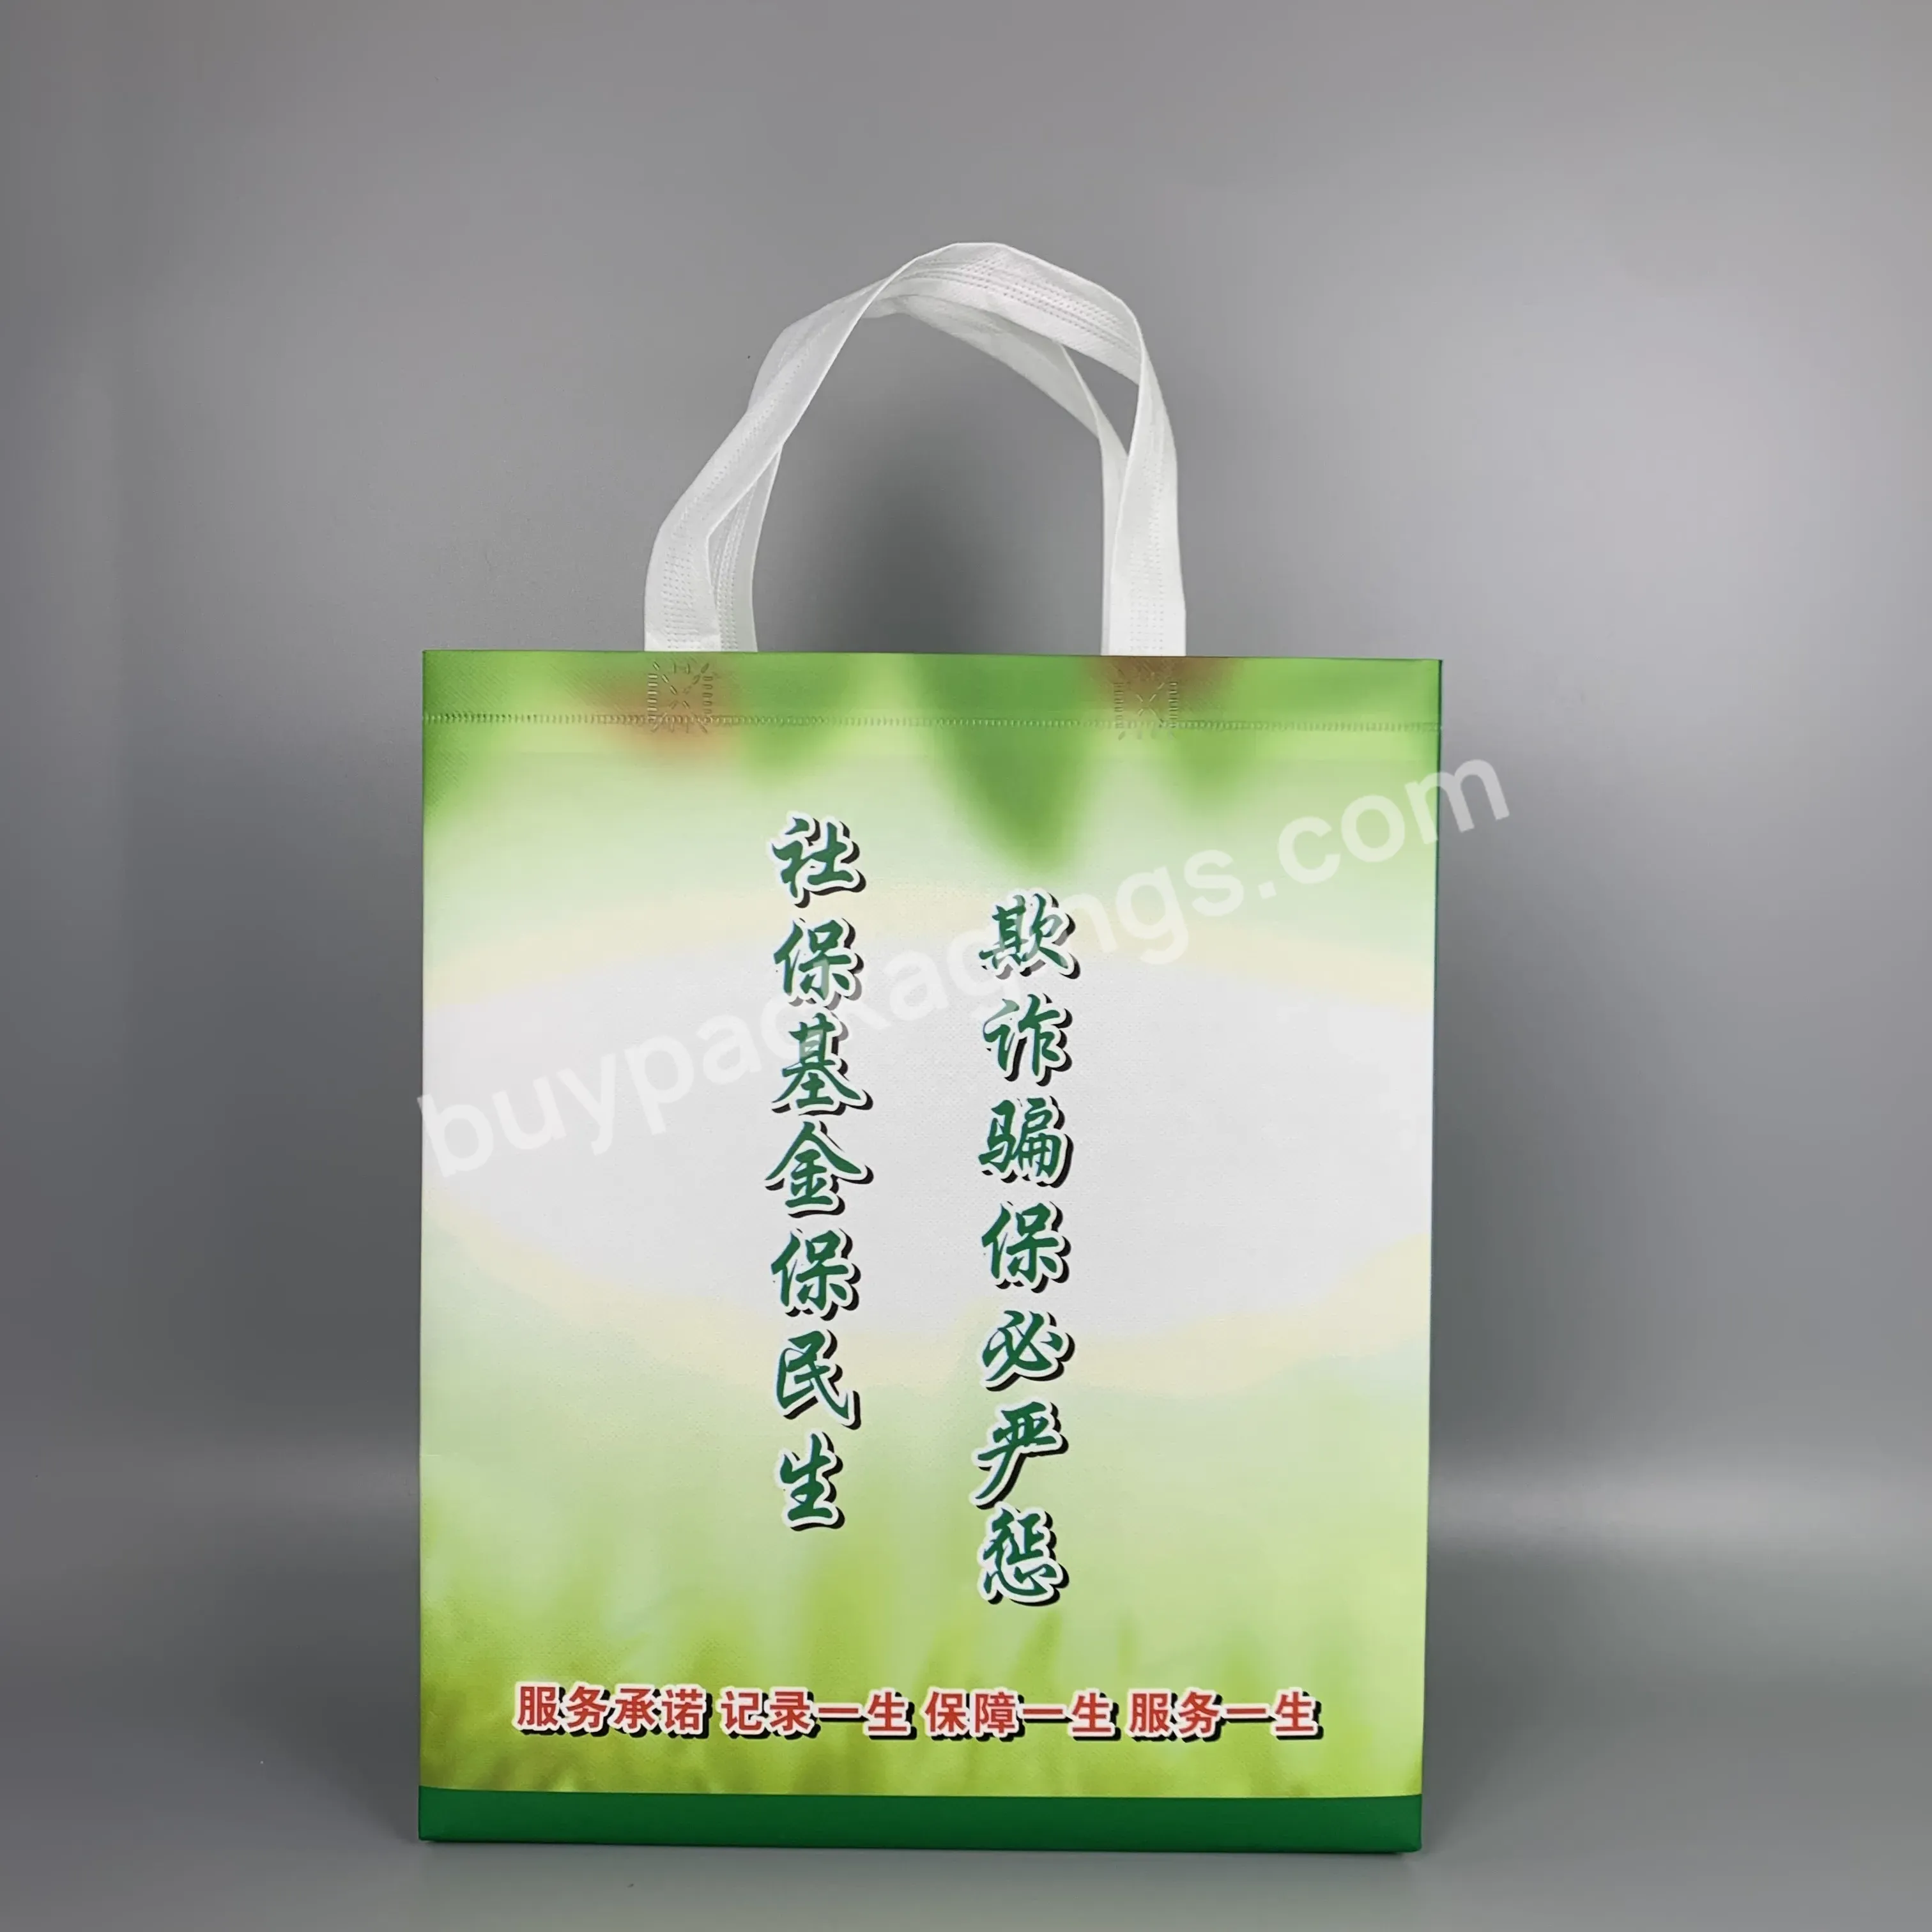 Whole Sale Tough Recyclable Ecological Biodegradable Waterproof Non Woven Bag With Handle - Buy Whole Sale Tough Recyclable Shopping Bag,Ecological Biodegradable Non Woven Bag,Waterproofnon Woven Bag With Handle.